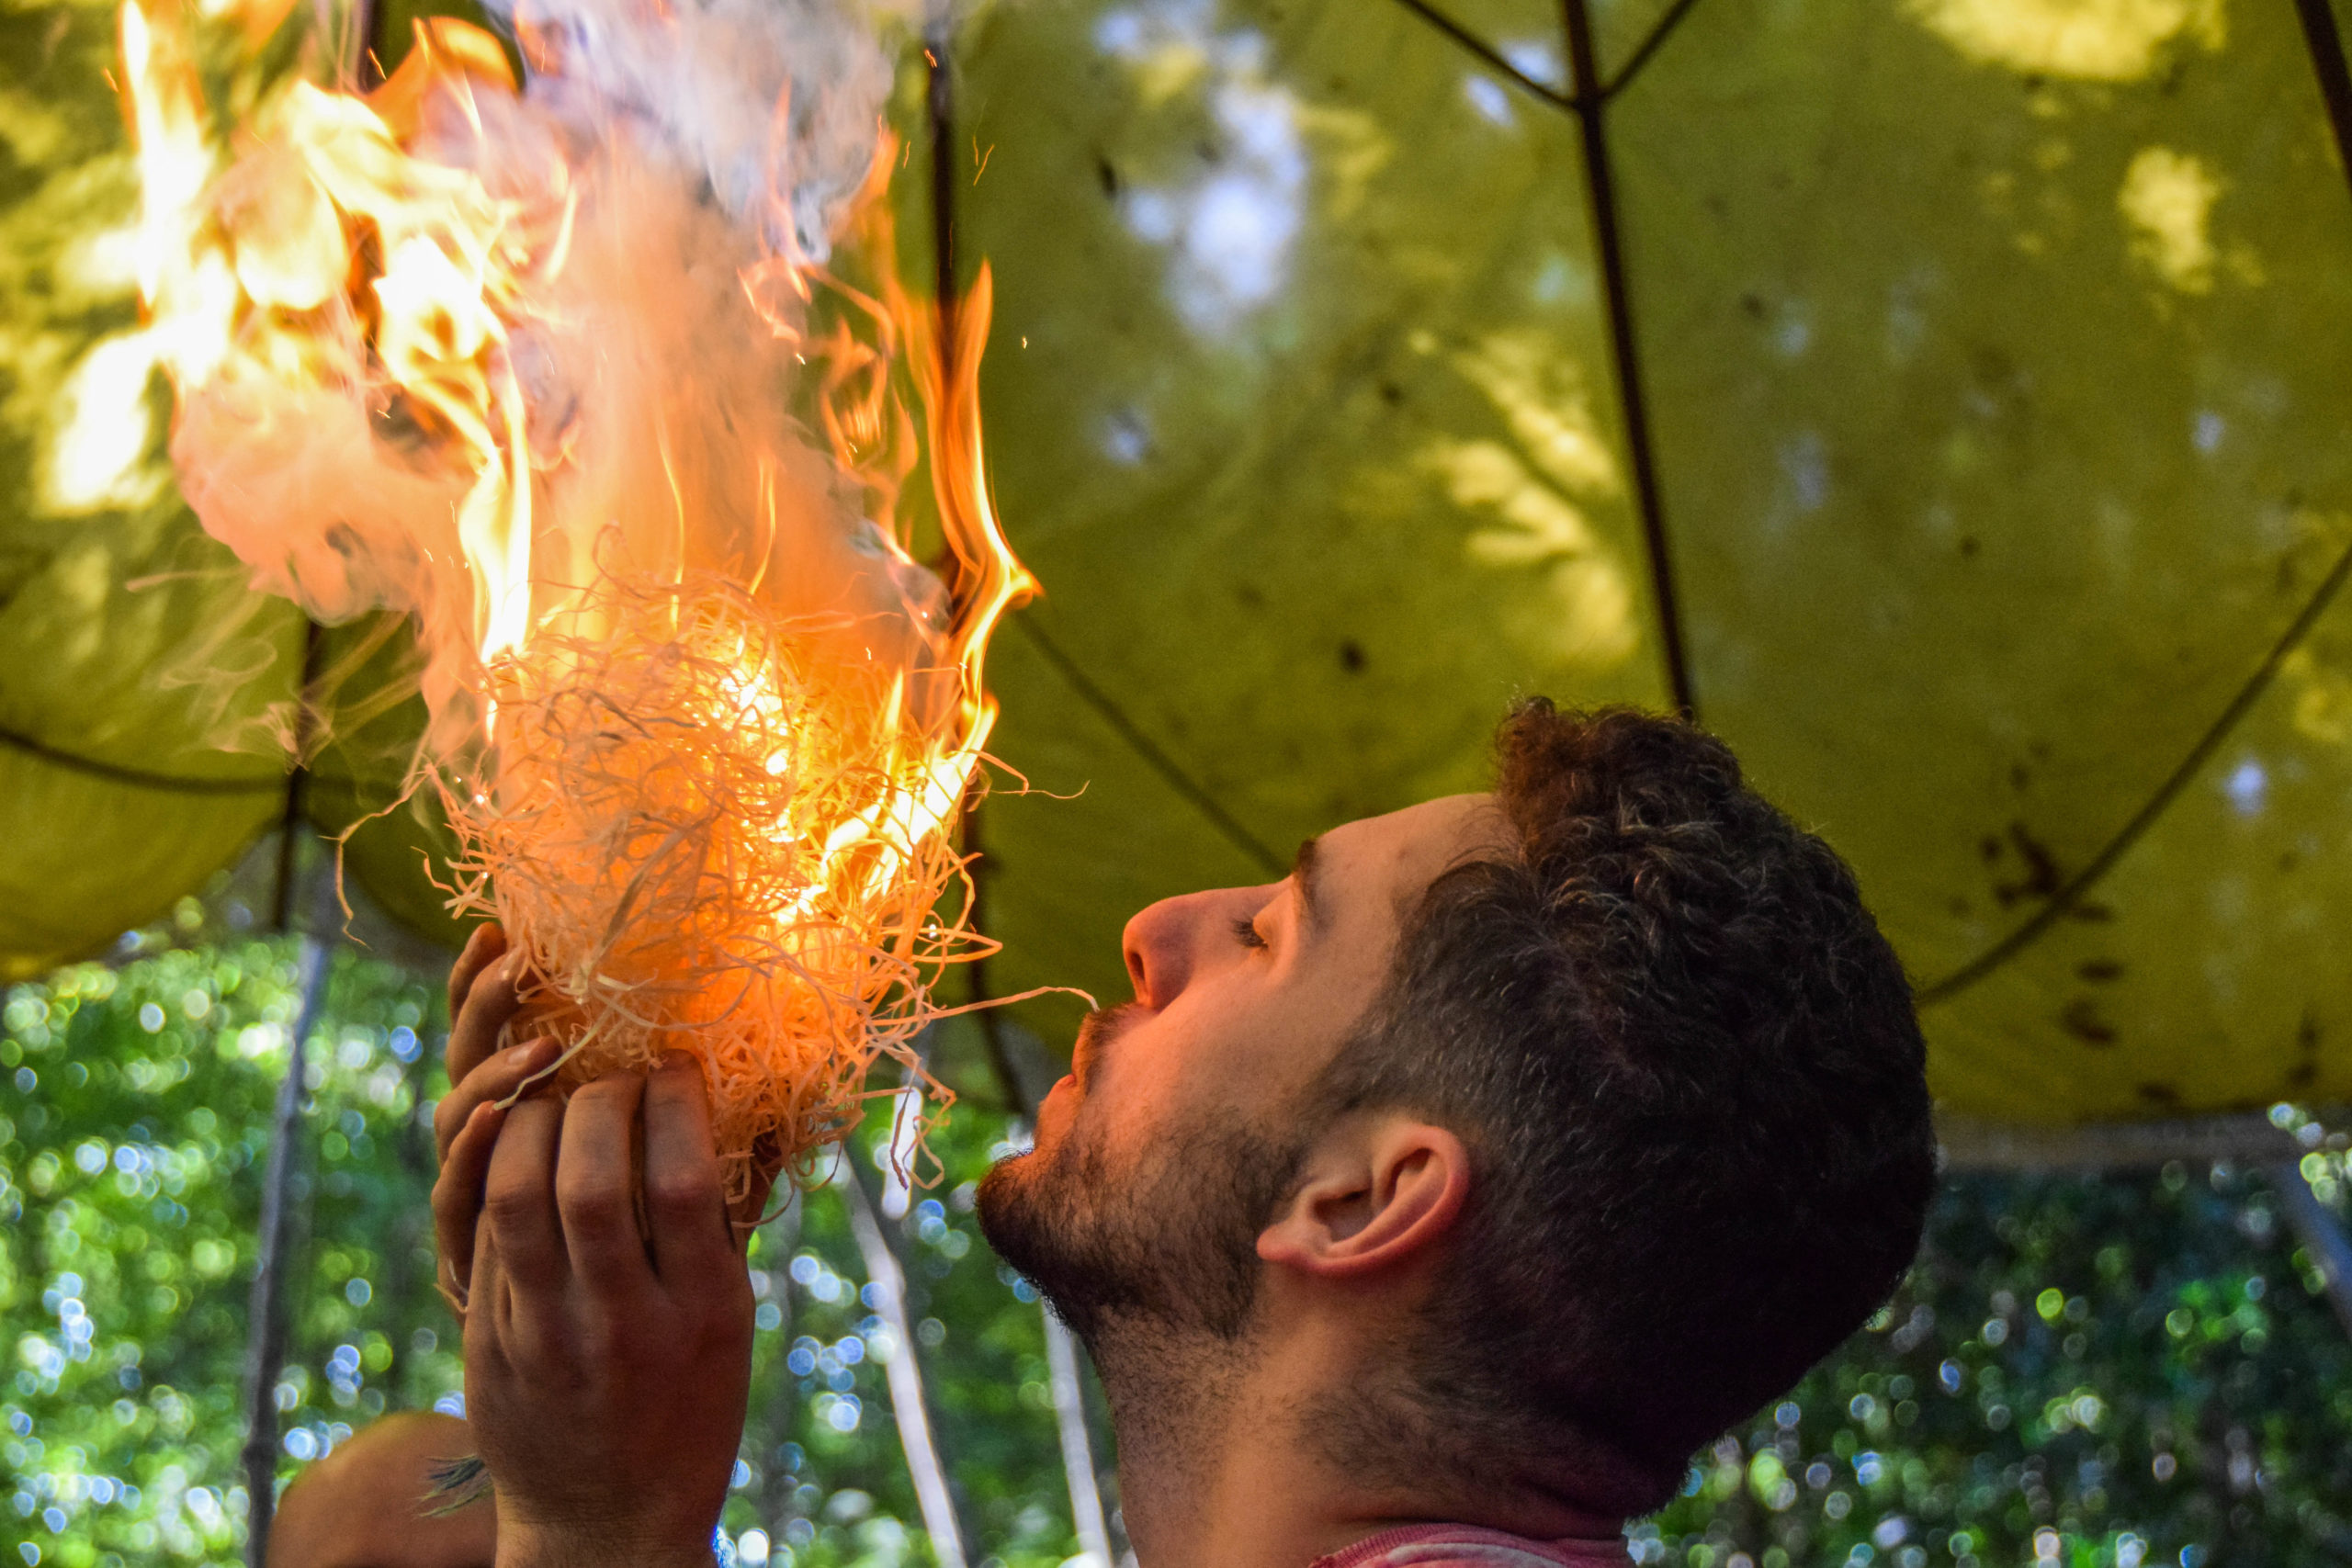 man blowing into a fire to give it oxygen